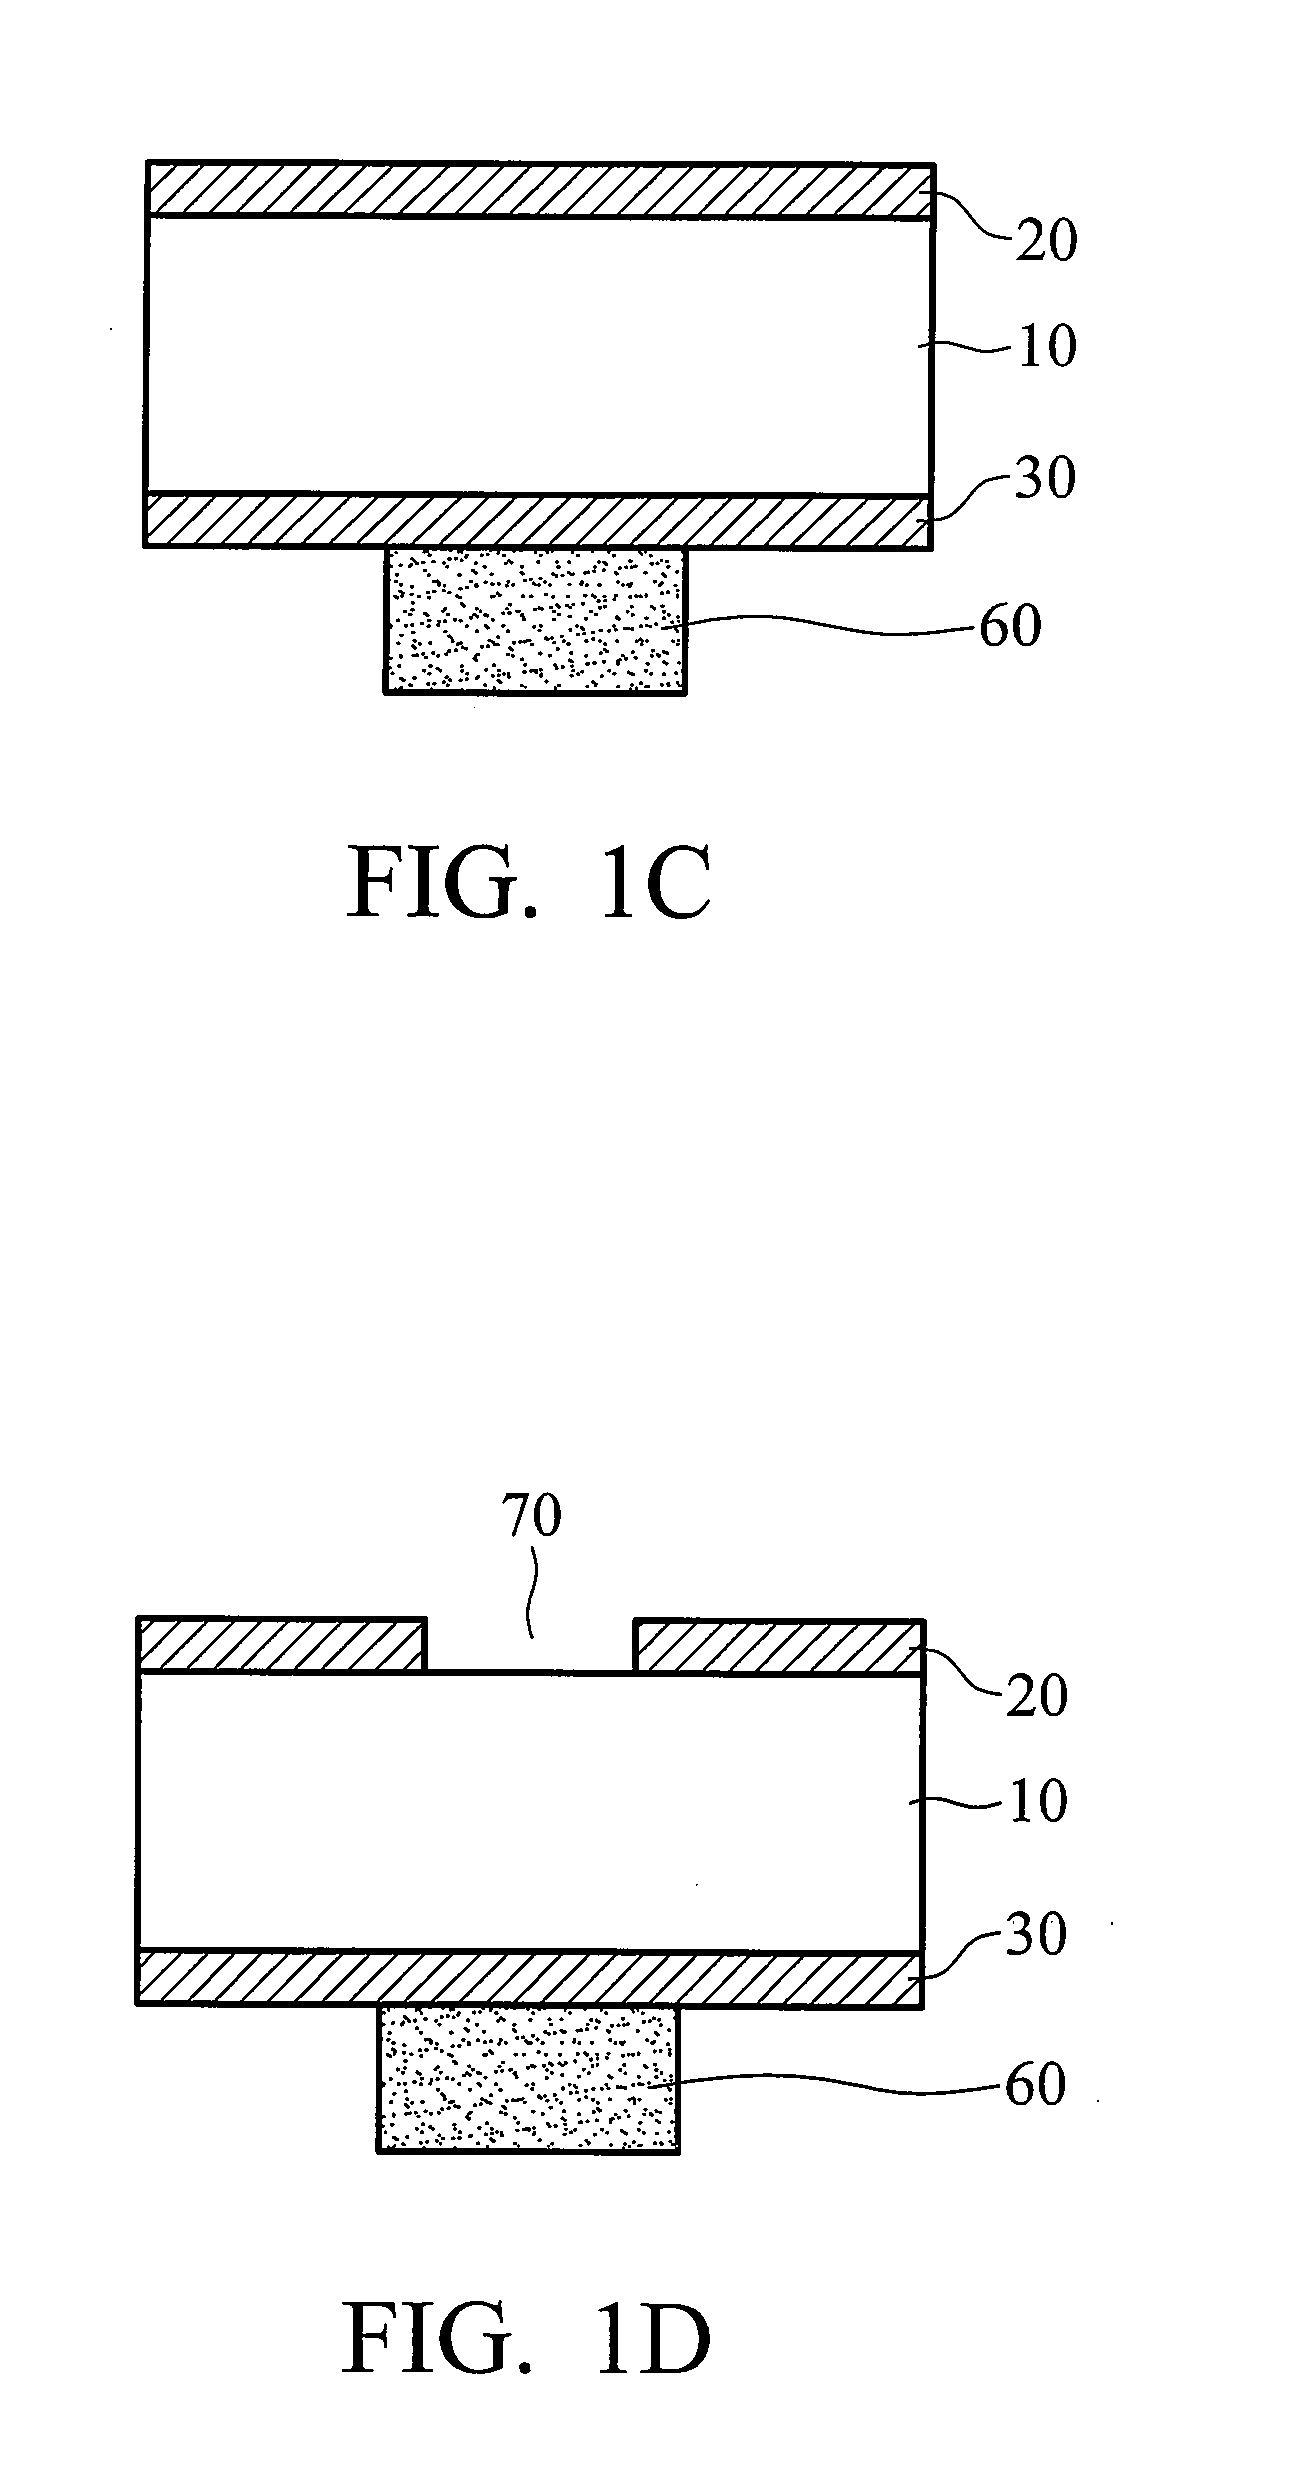 High density package substrate and method for fabricating the same